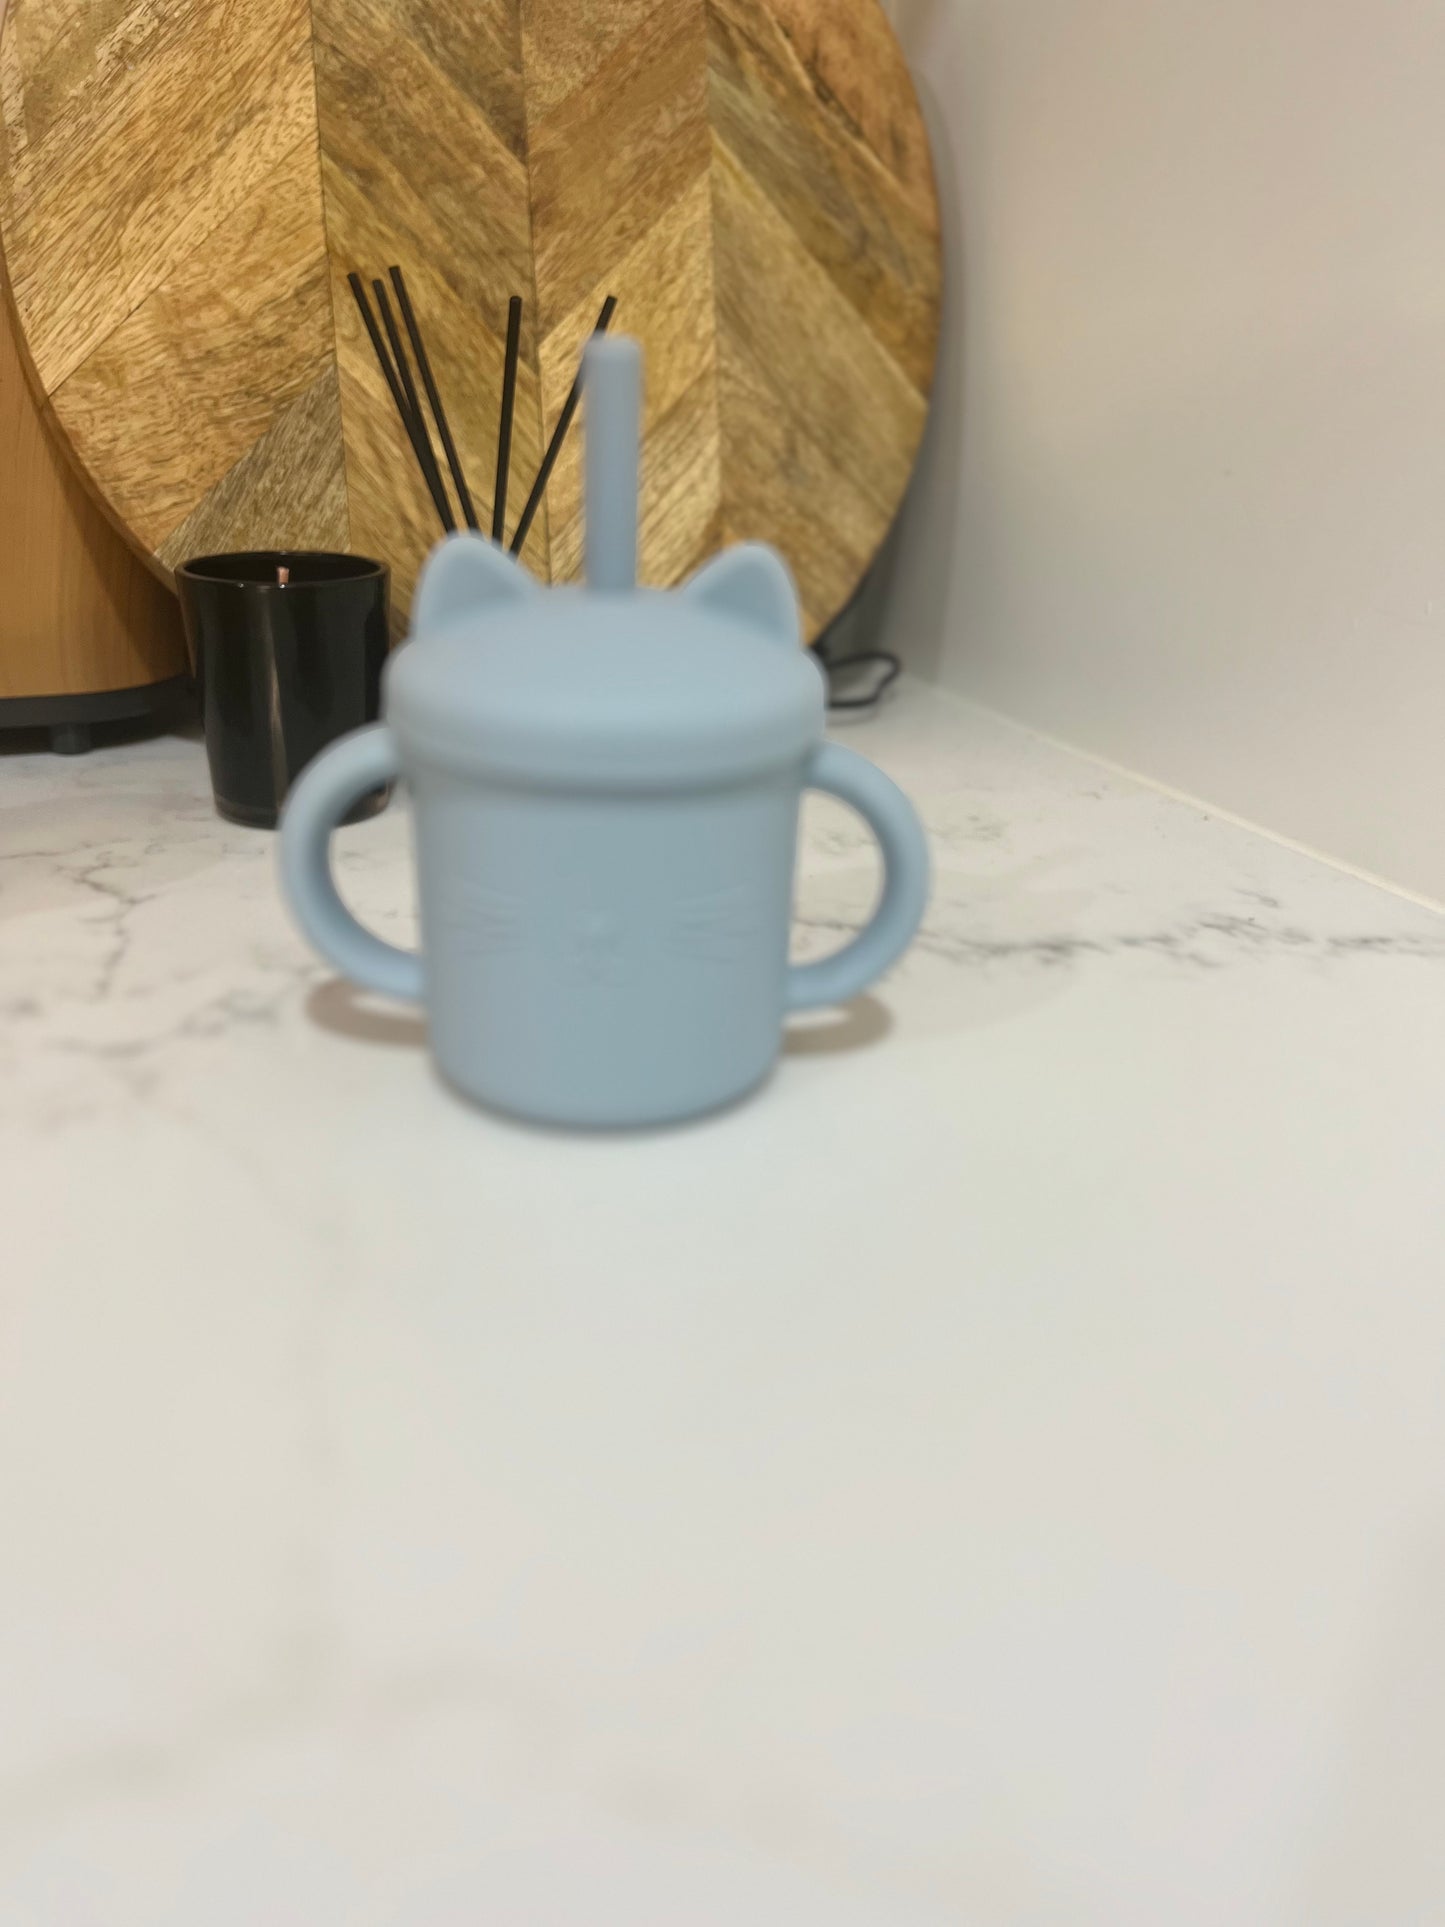 Silicone kitty sippy cup